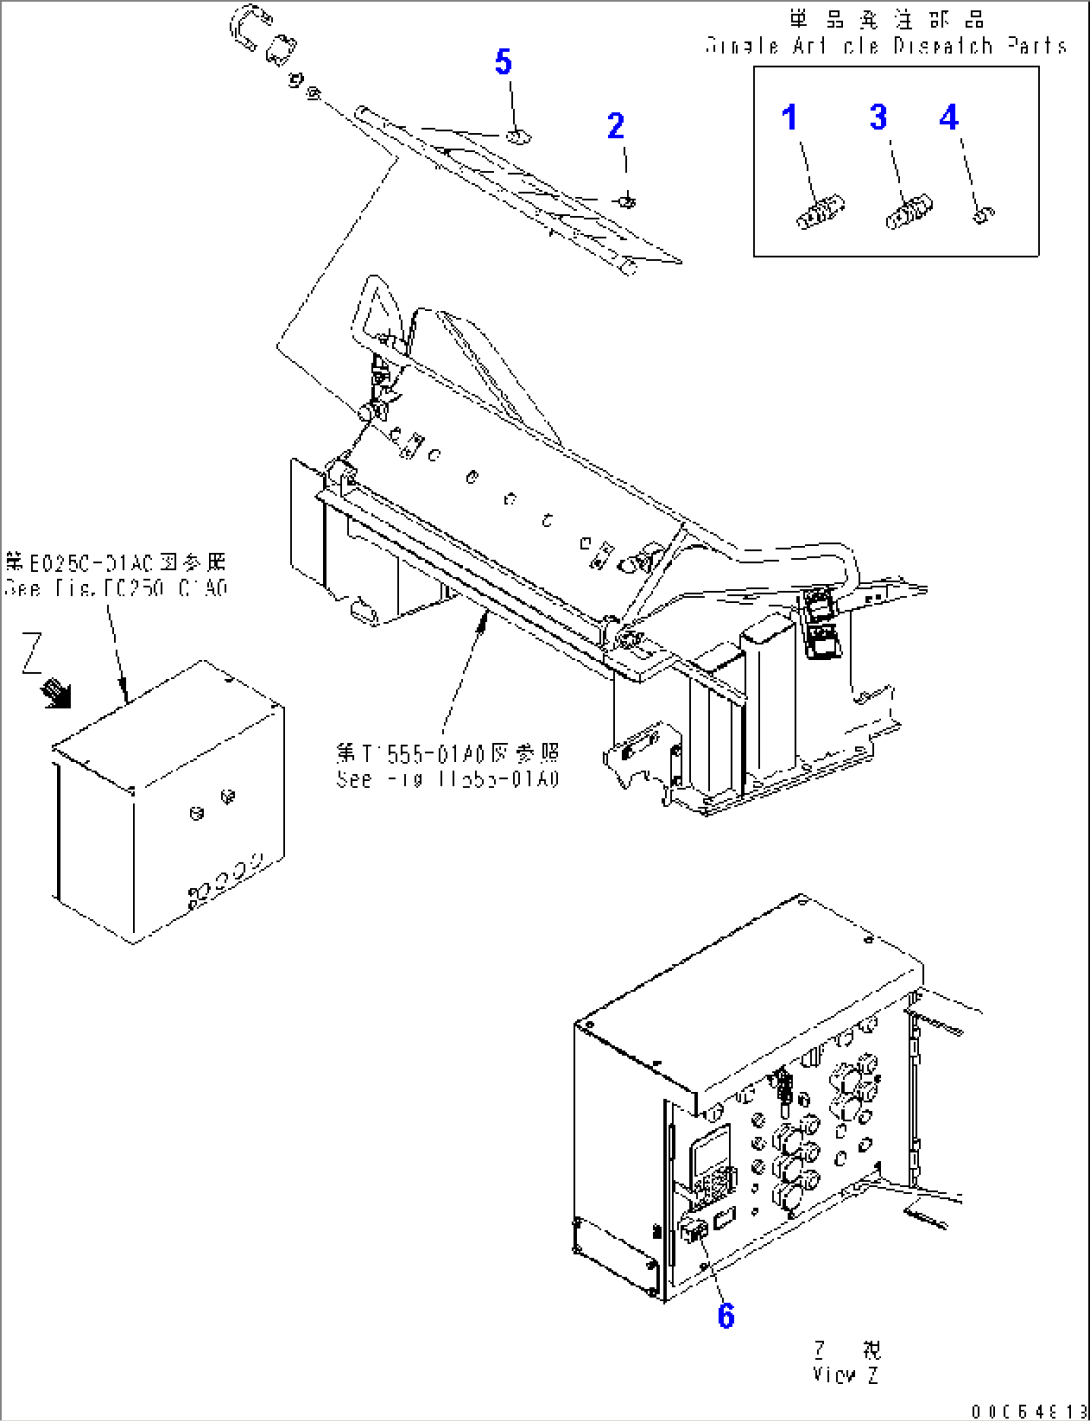 WATER TANK AND PUMP (NOZZLE AND SWITCH)(#2001-)